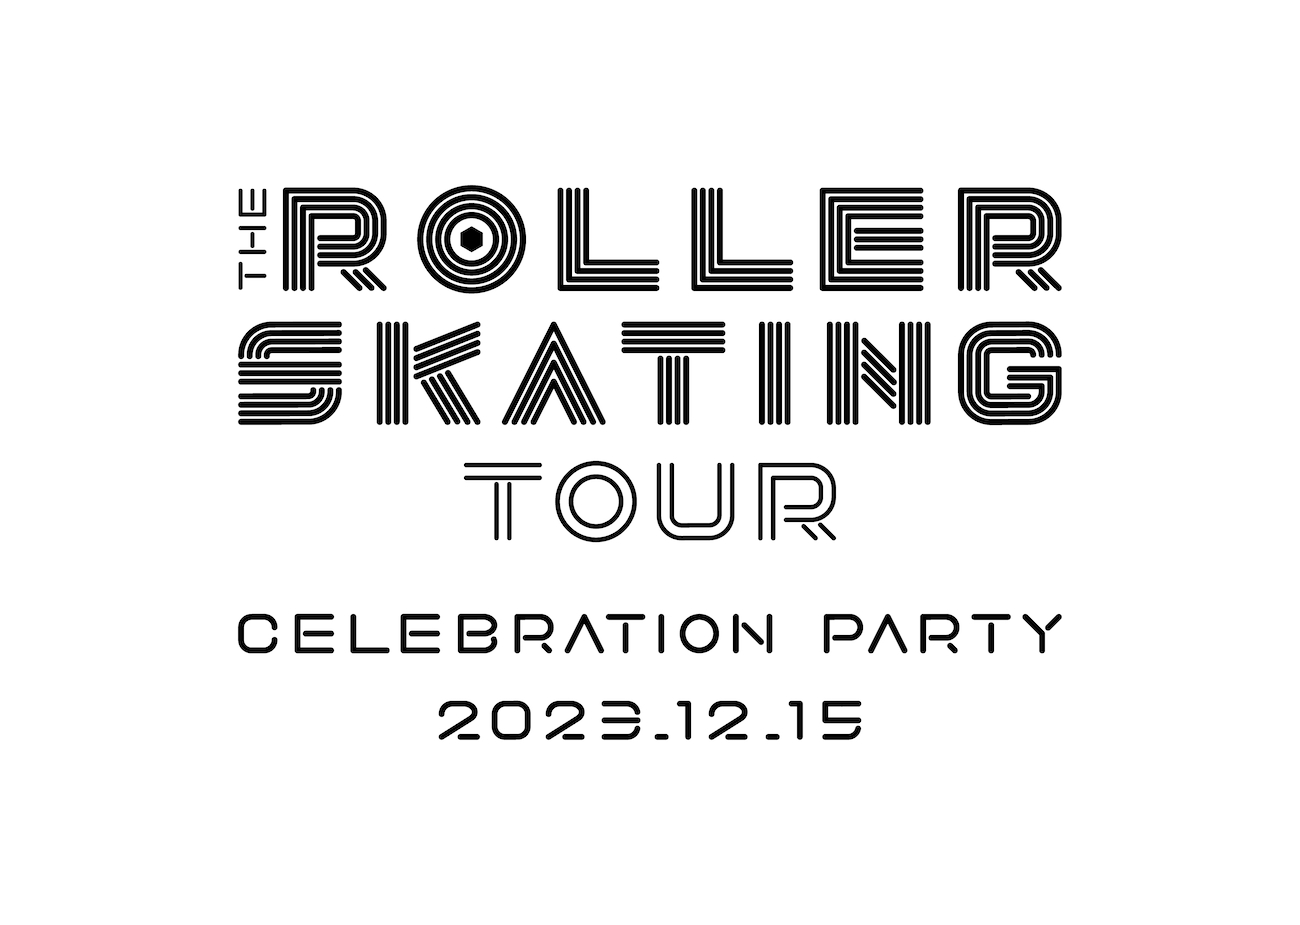 THE ROLLER SKATING TOUR CELEBRATION PARTY